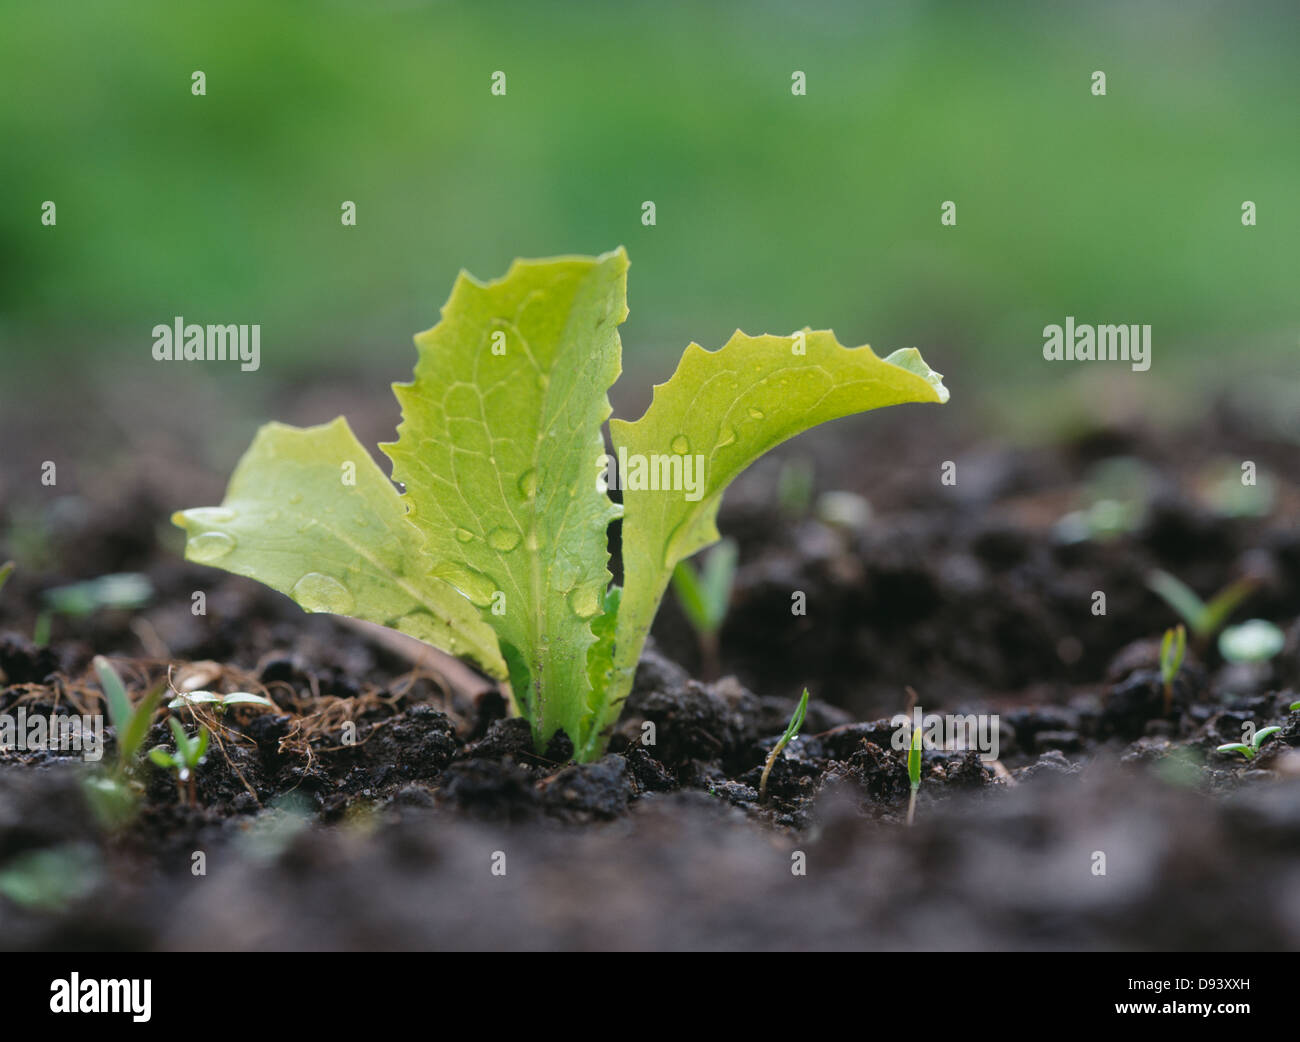 Leaf vegetable growing on soil with water drop Stock Photo